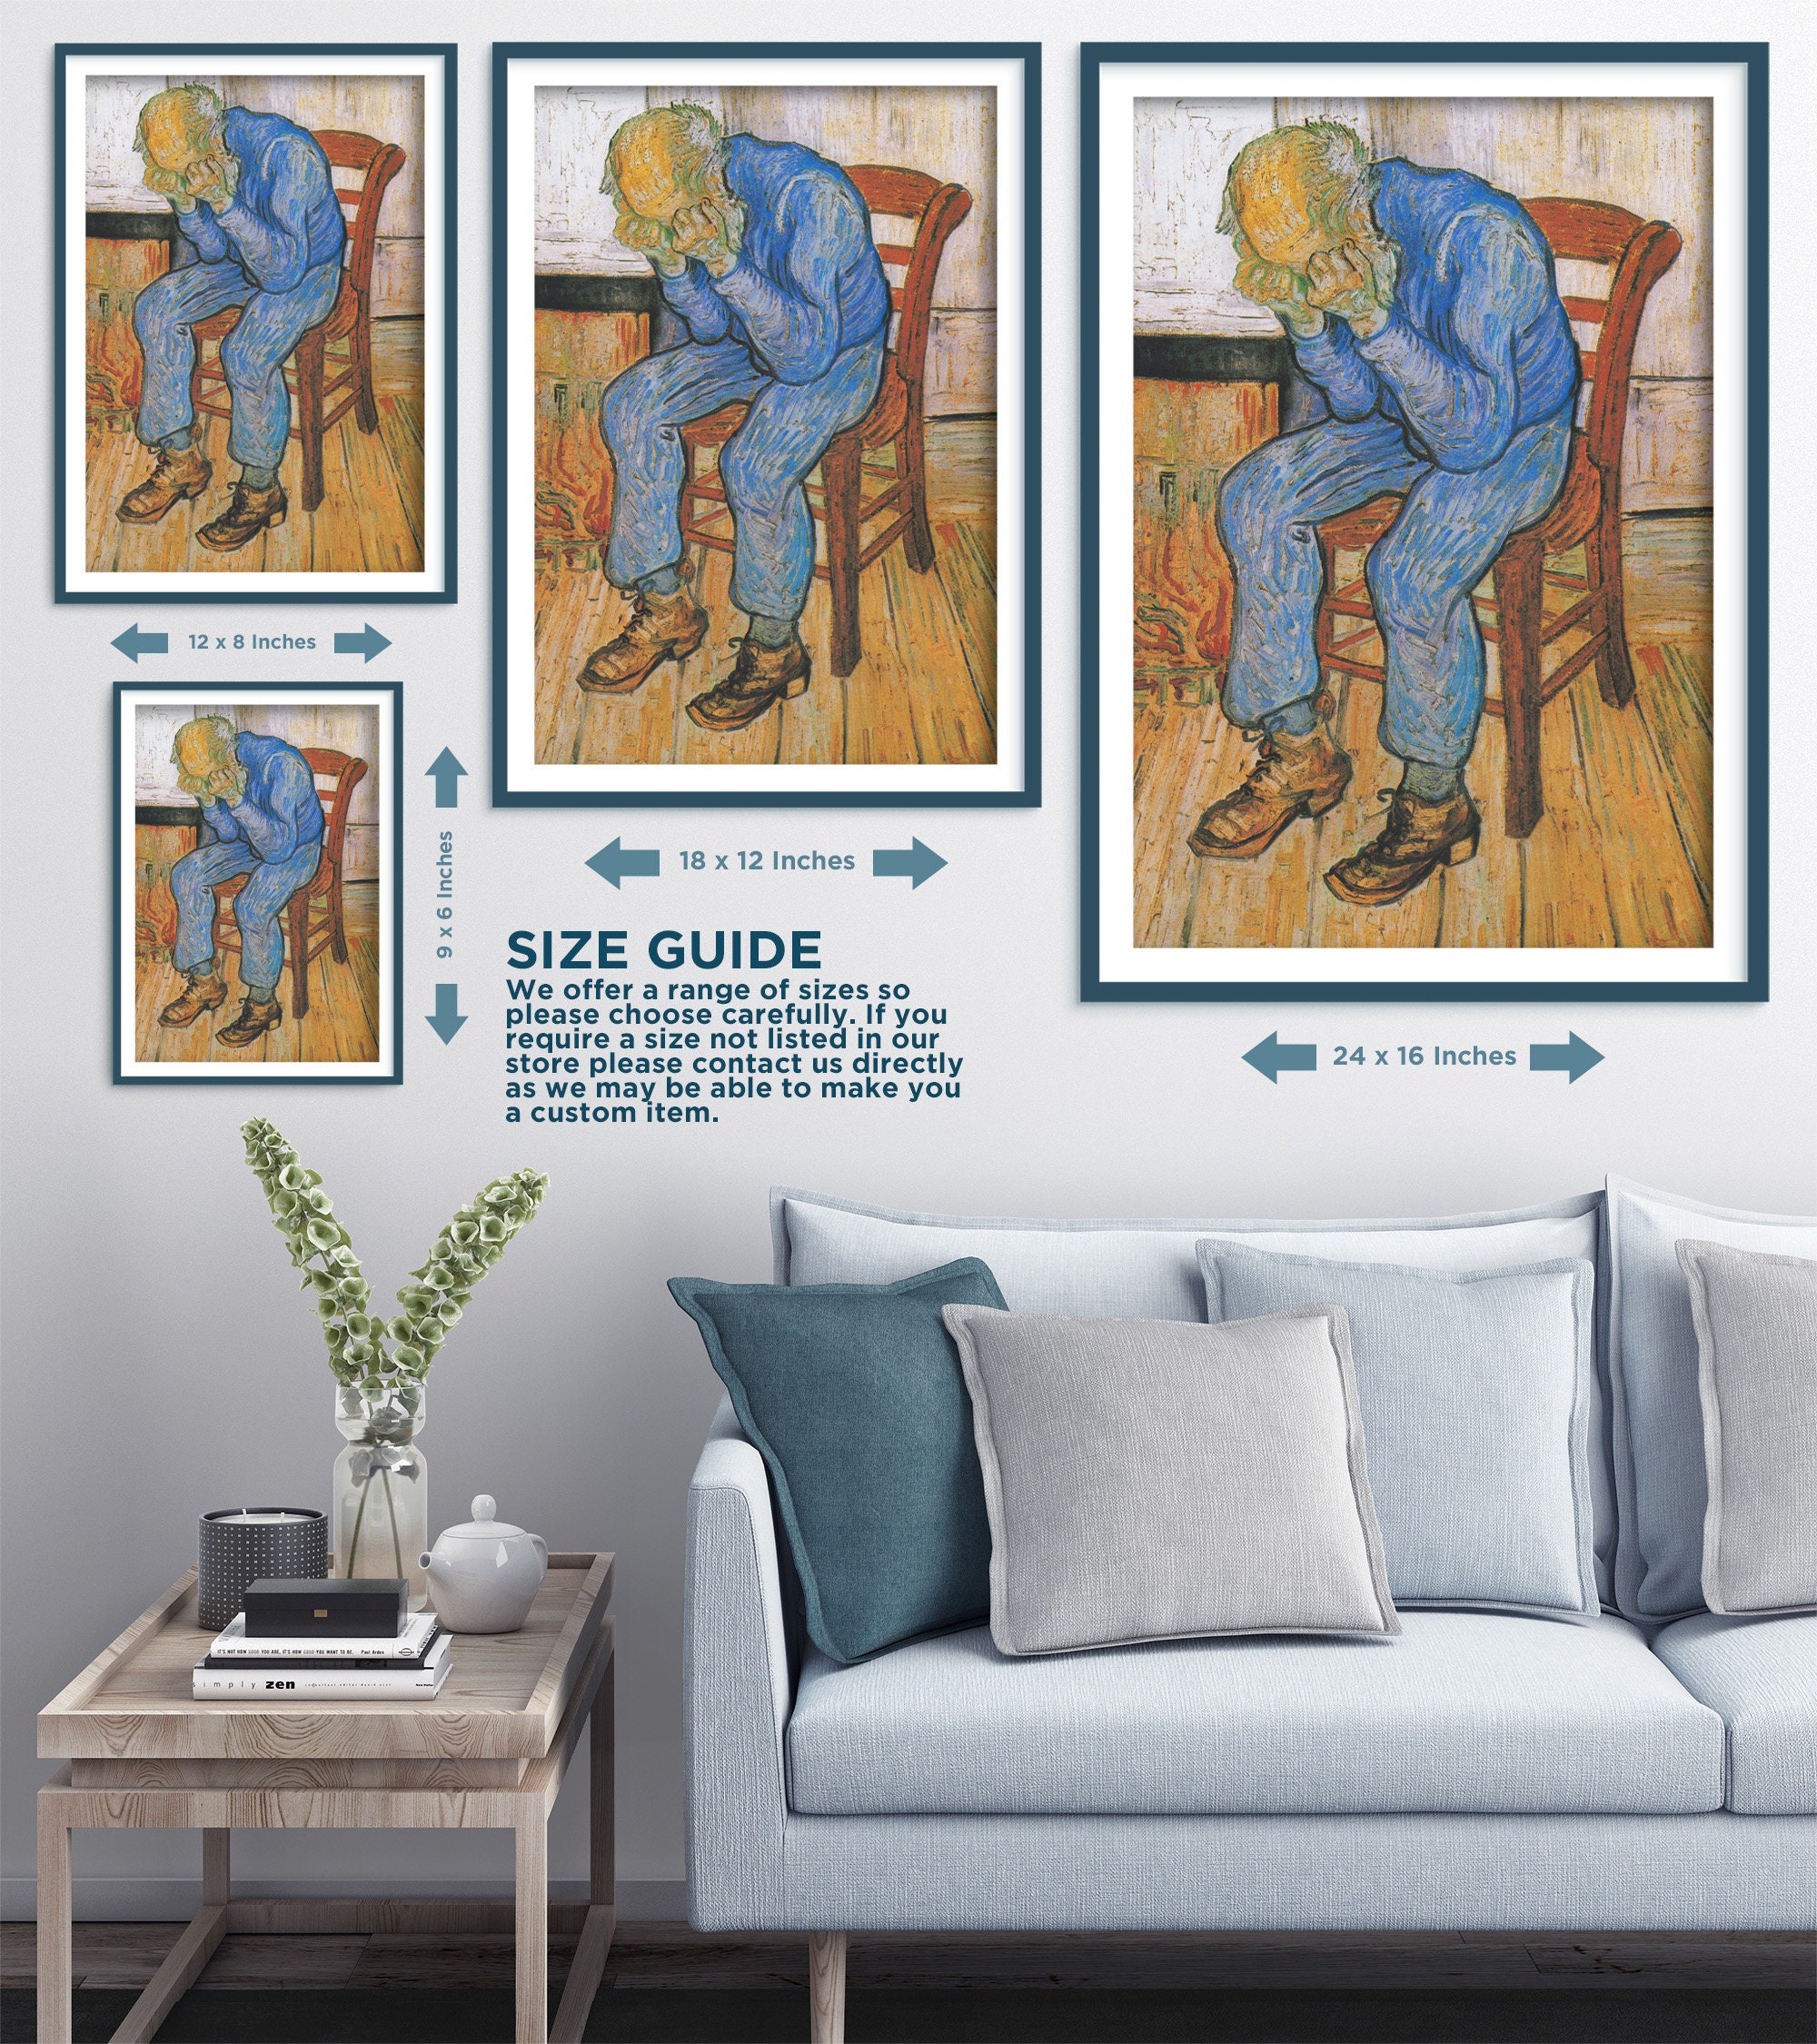 Vincent Van Gogh at Eternity's Gate / Sorrowing Old Man 1890 Art Print  Painting Poster Gift Photo Quote Wall Home Decor Depression 